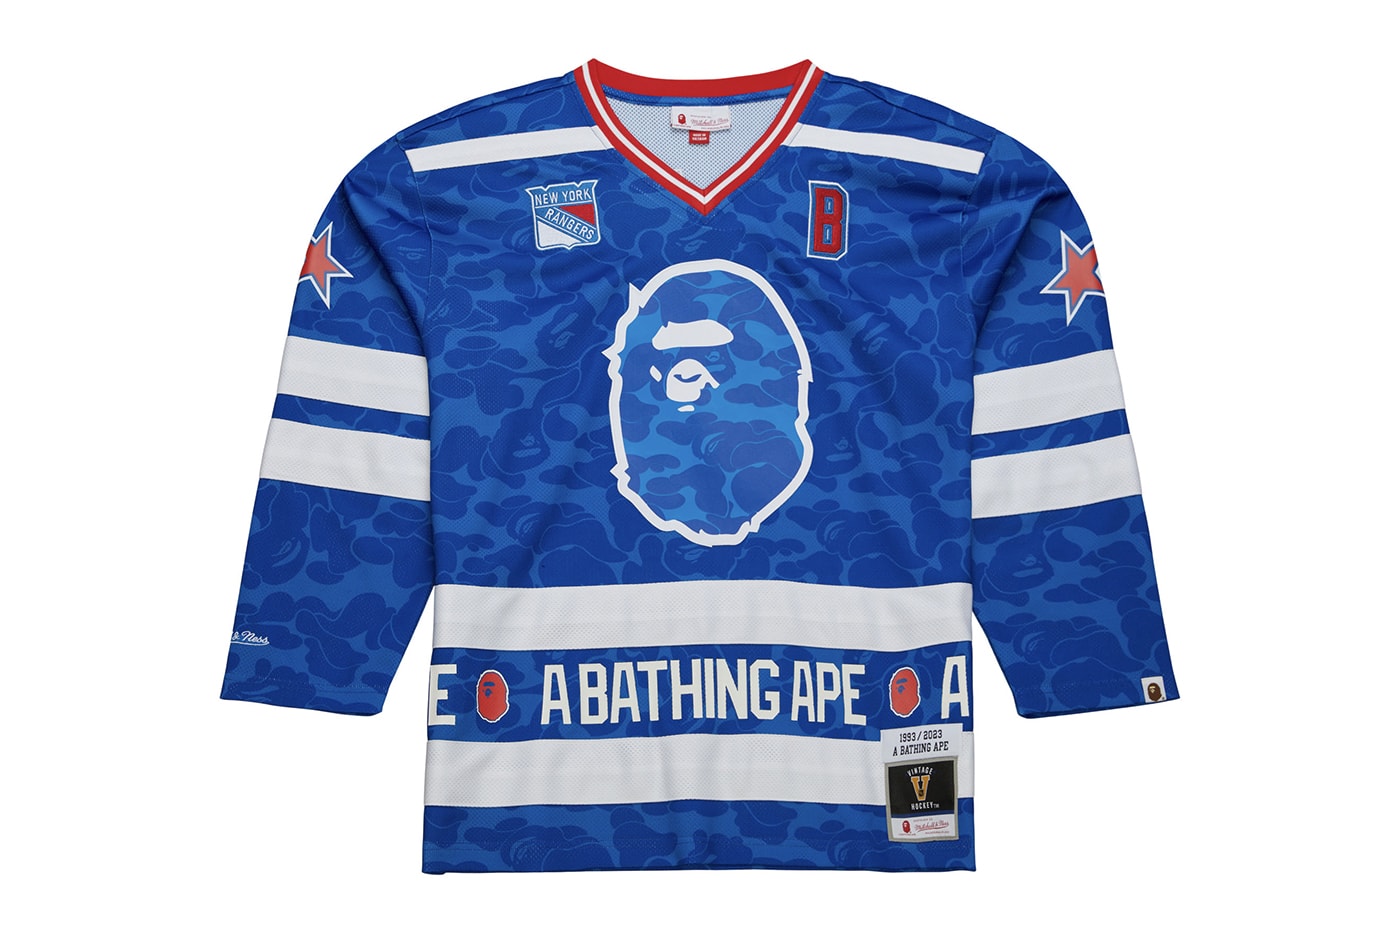 BAPE Teams up With Mitchell & Ness For New NHL Collaboration jersey beanies national hockey league Anaheim Ducks, New York Rangers, Los Angeles Kings, and Florida Panthers